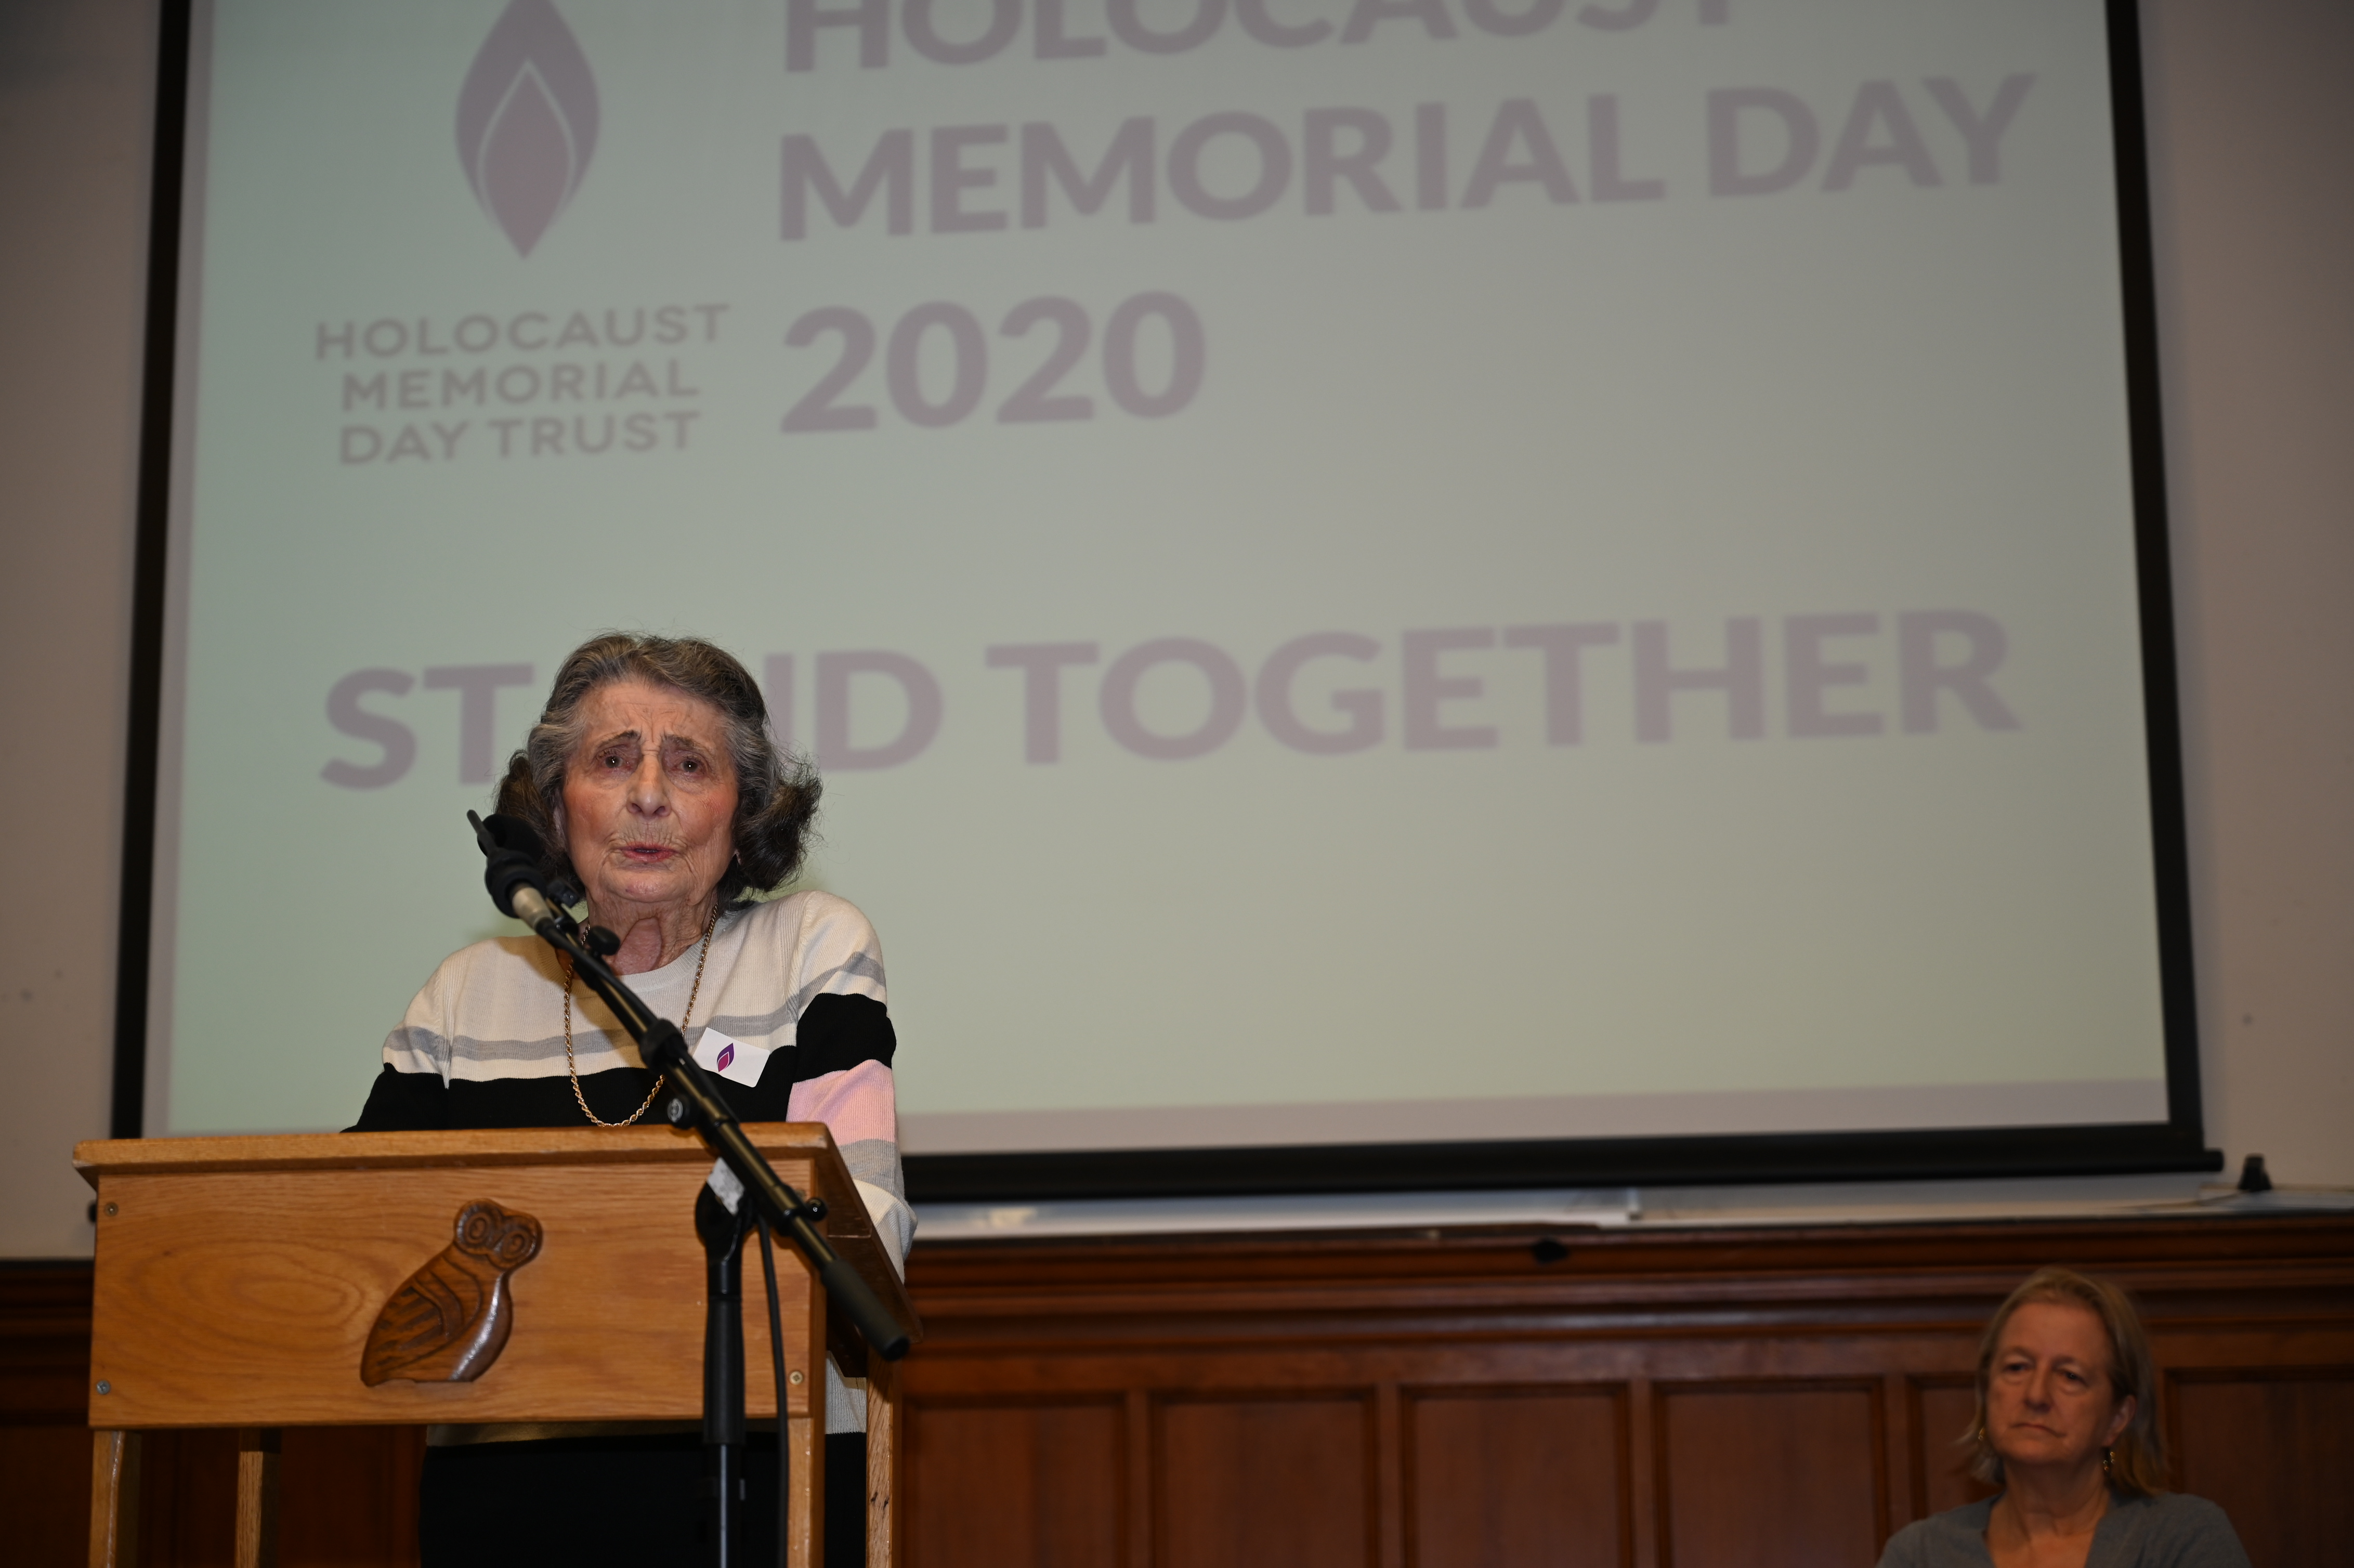 Mrs Eve Gill speaking on Holocaust Memorial Day